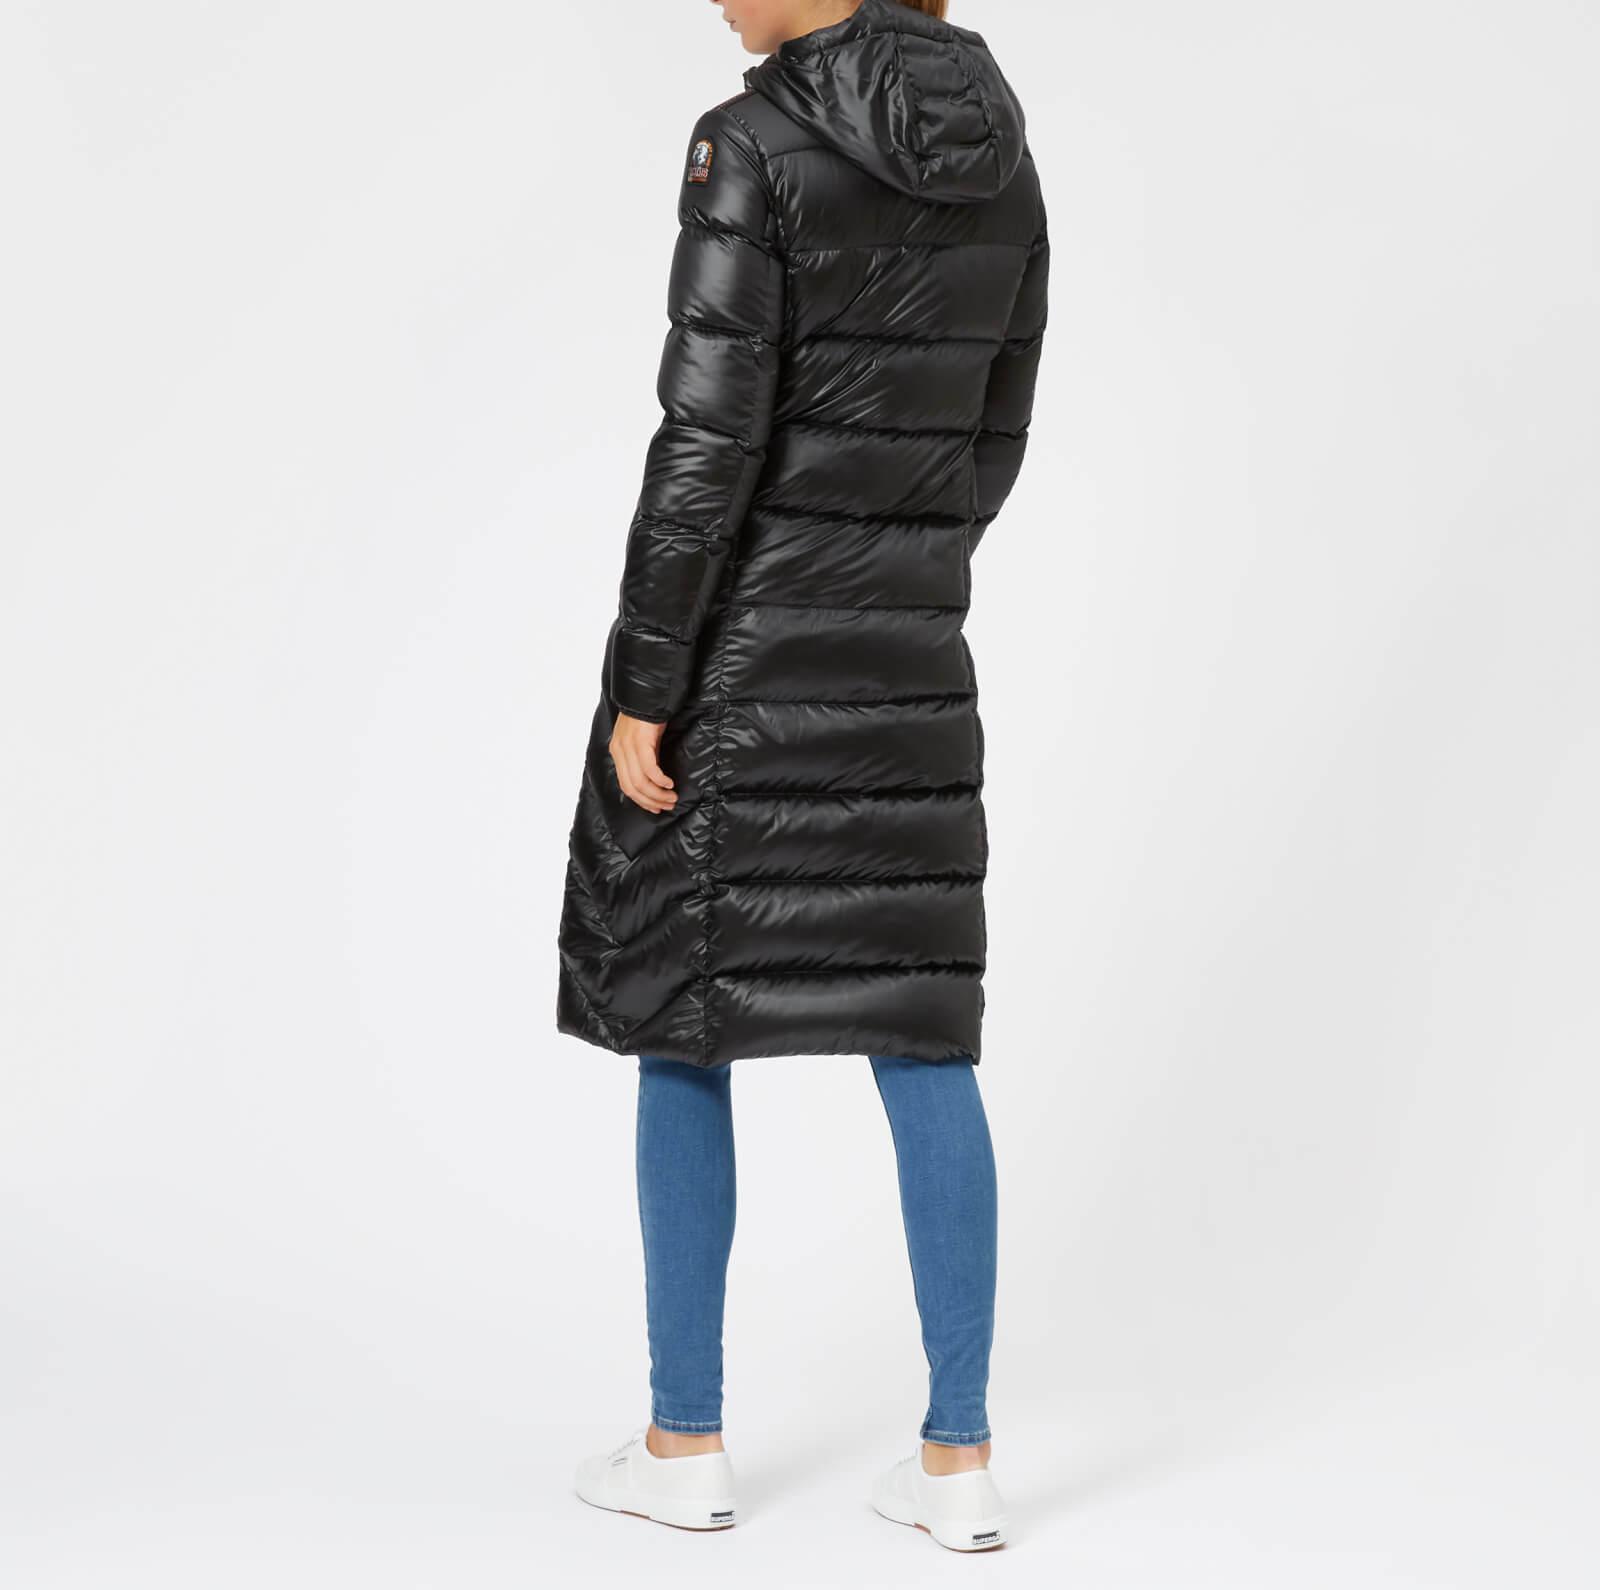 Parajumpers Leah Puffer Coat in Black - Lyst